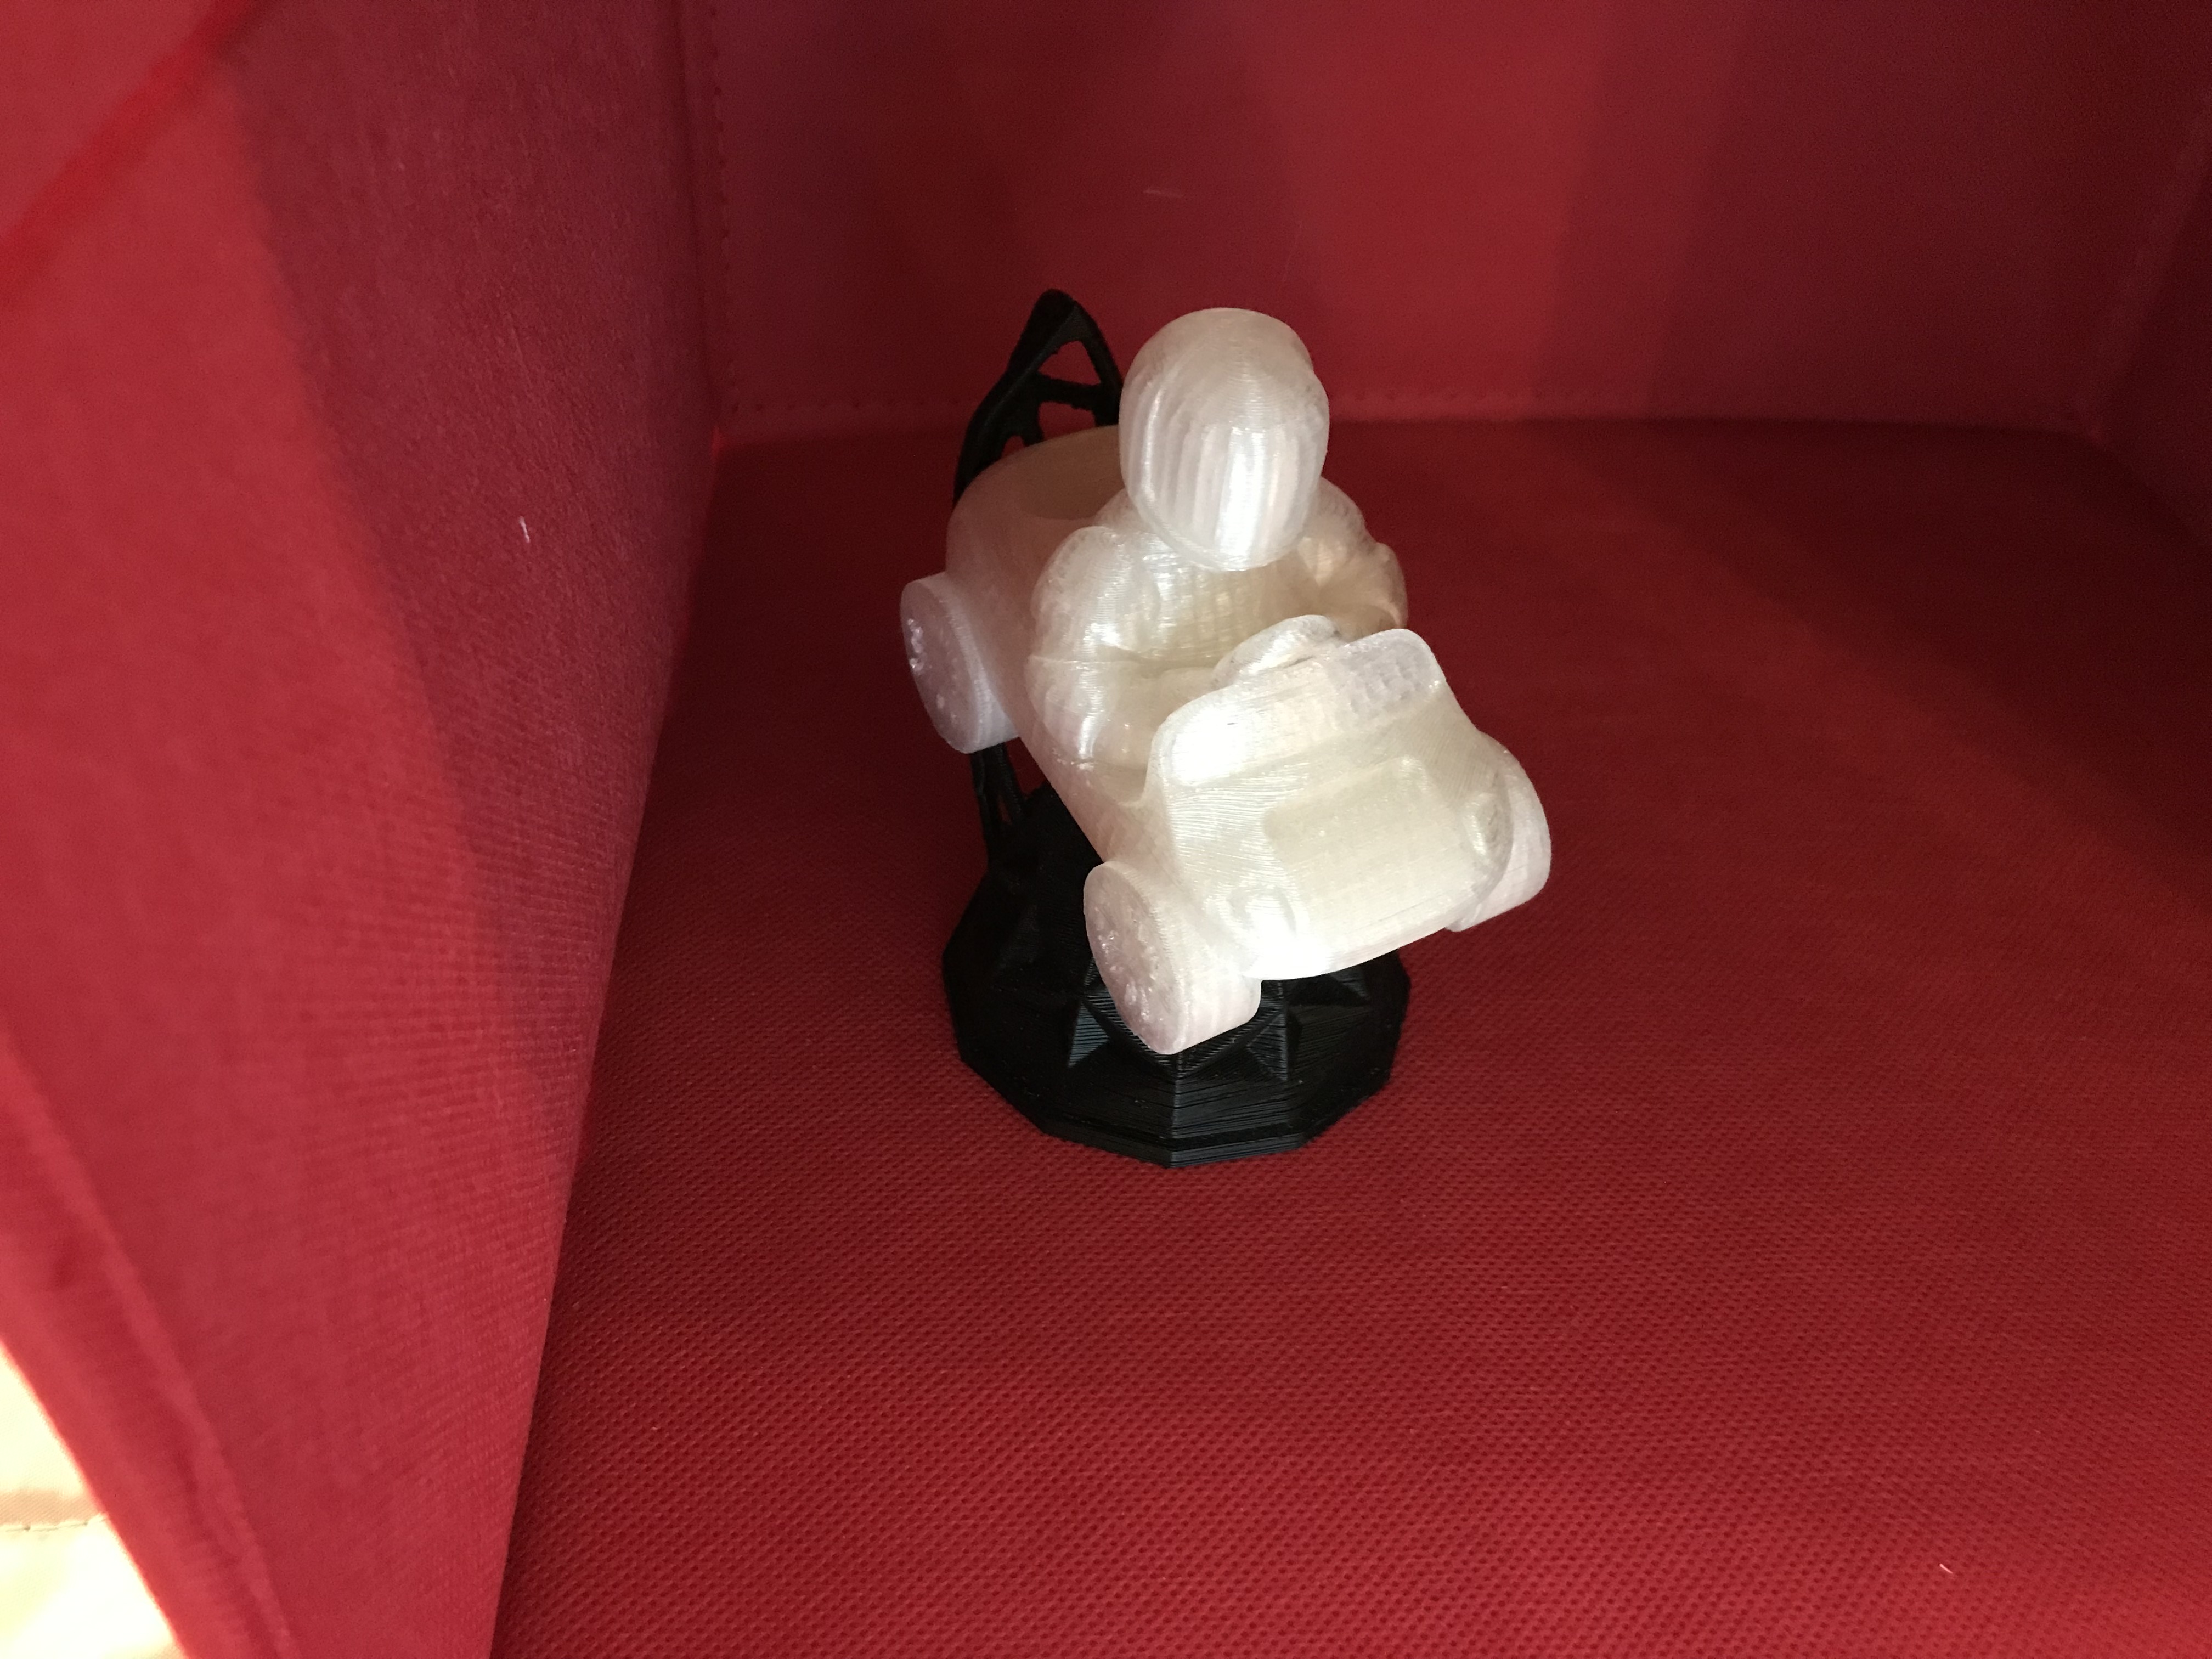 3D Printable SpaceX's Starman desk toy by VECTARY - the free, online 3D ...